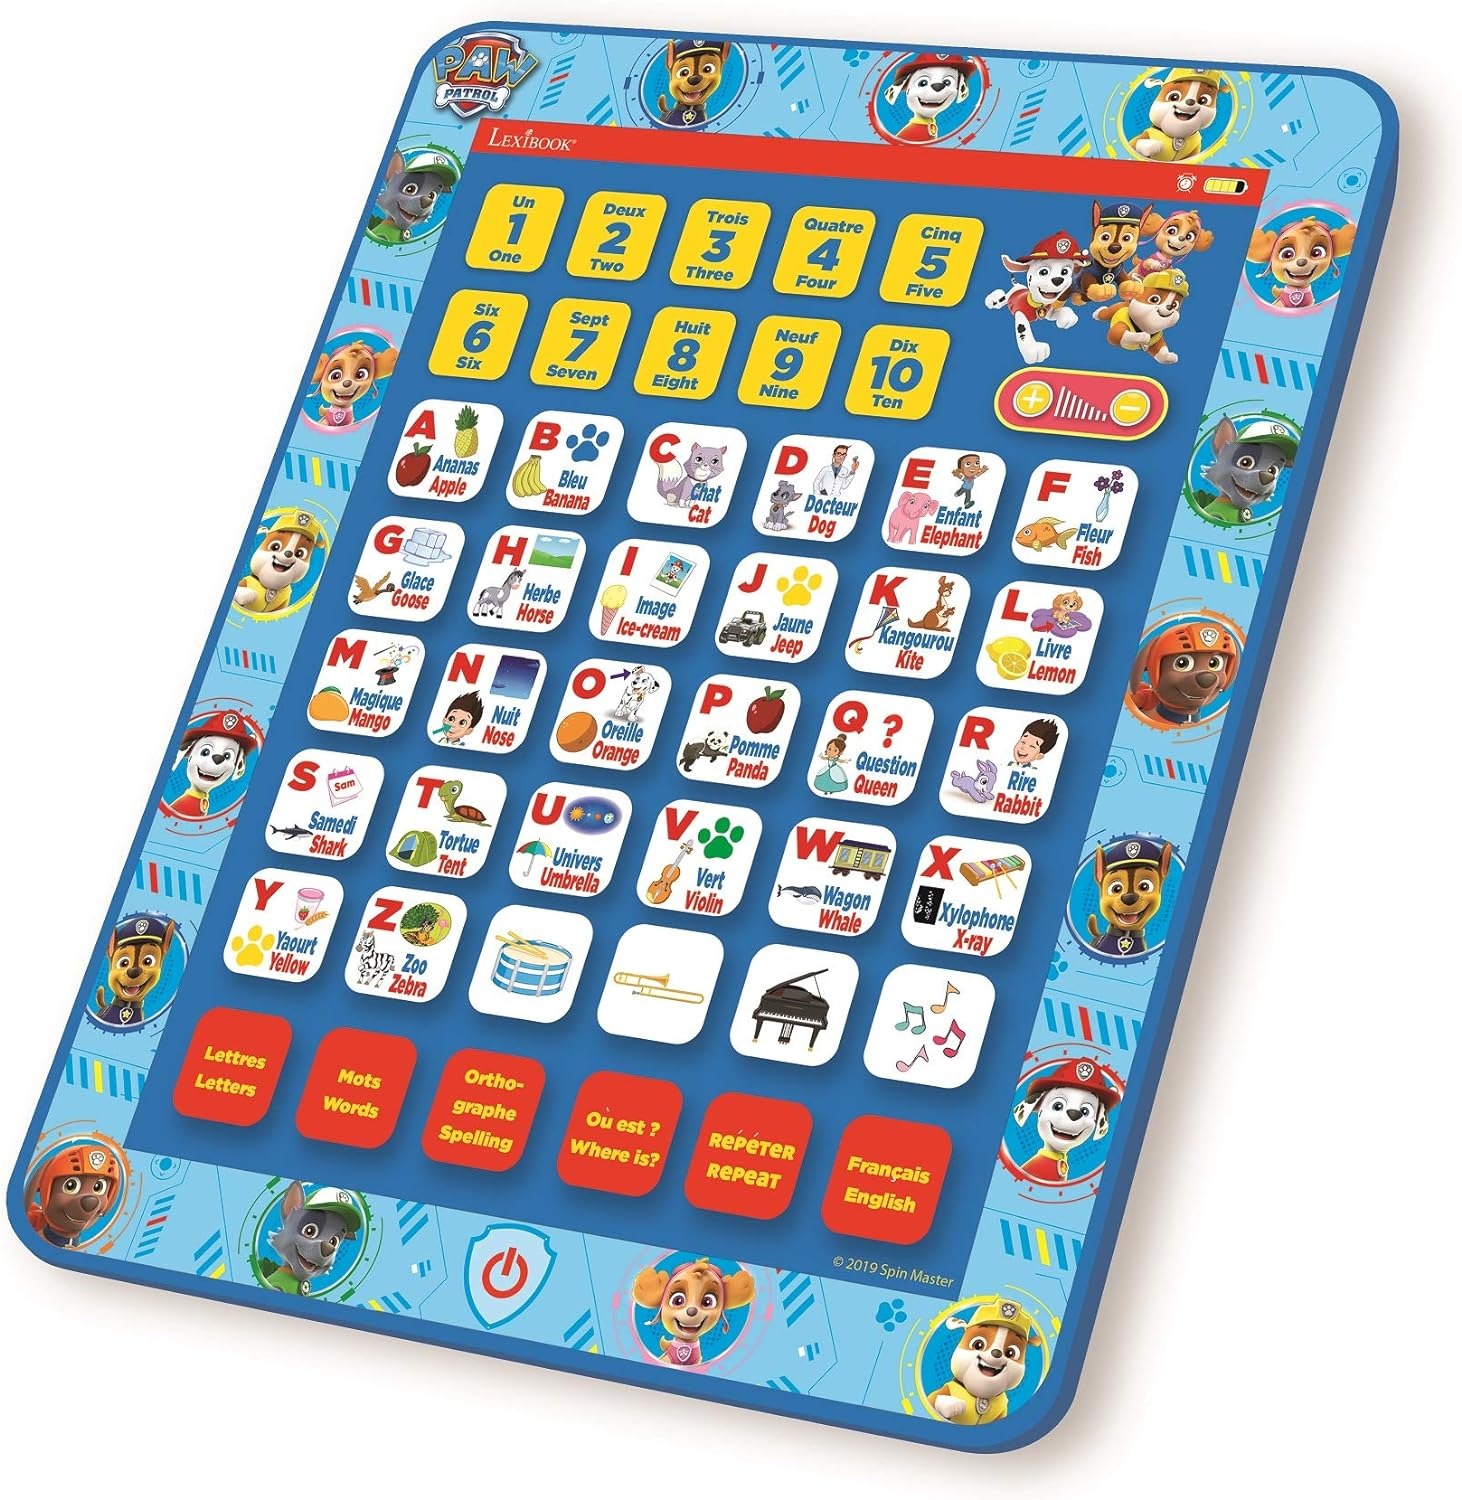 LEXIBOOK Electronic Educational Toy - Fun for All Ages - Ideal